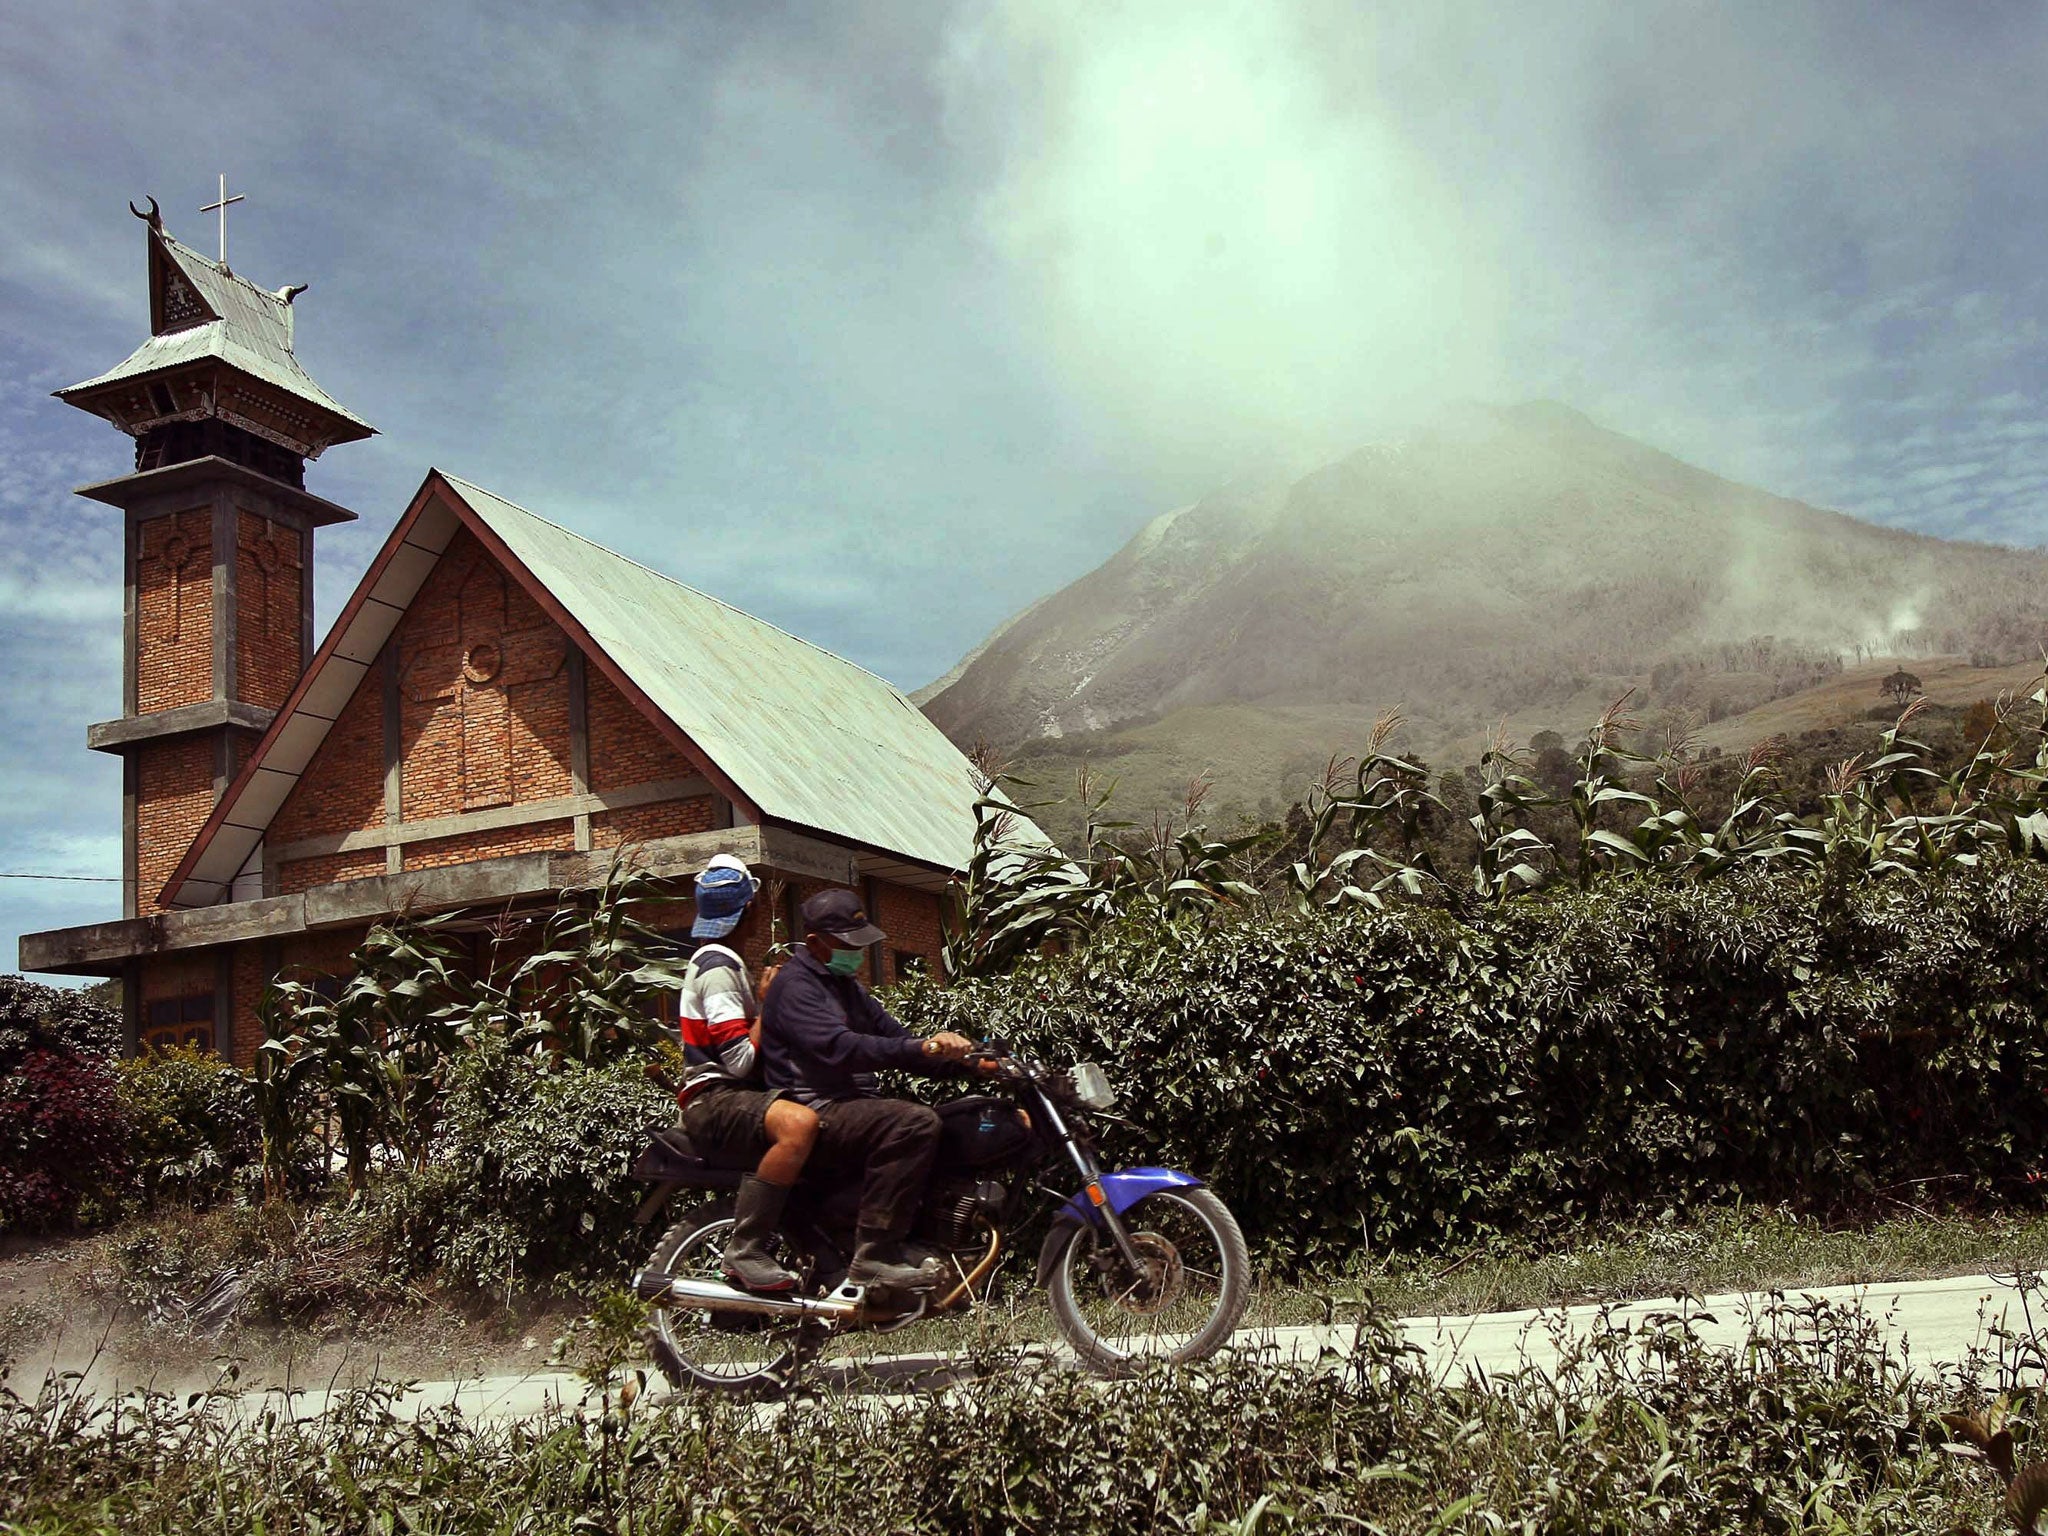 Indonesian villagers ride a motorbike as Mount Sinabung spews hot gas and ashes in the background during an eruption in Karo, North Sumatra province, Indonesia